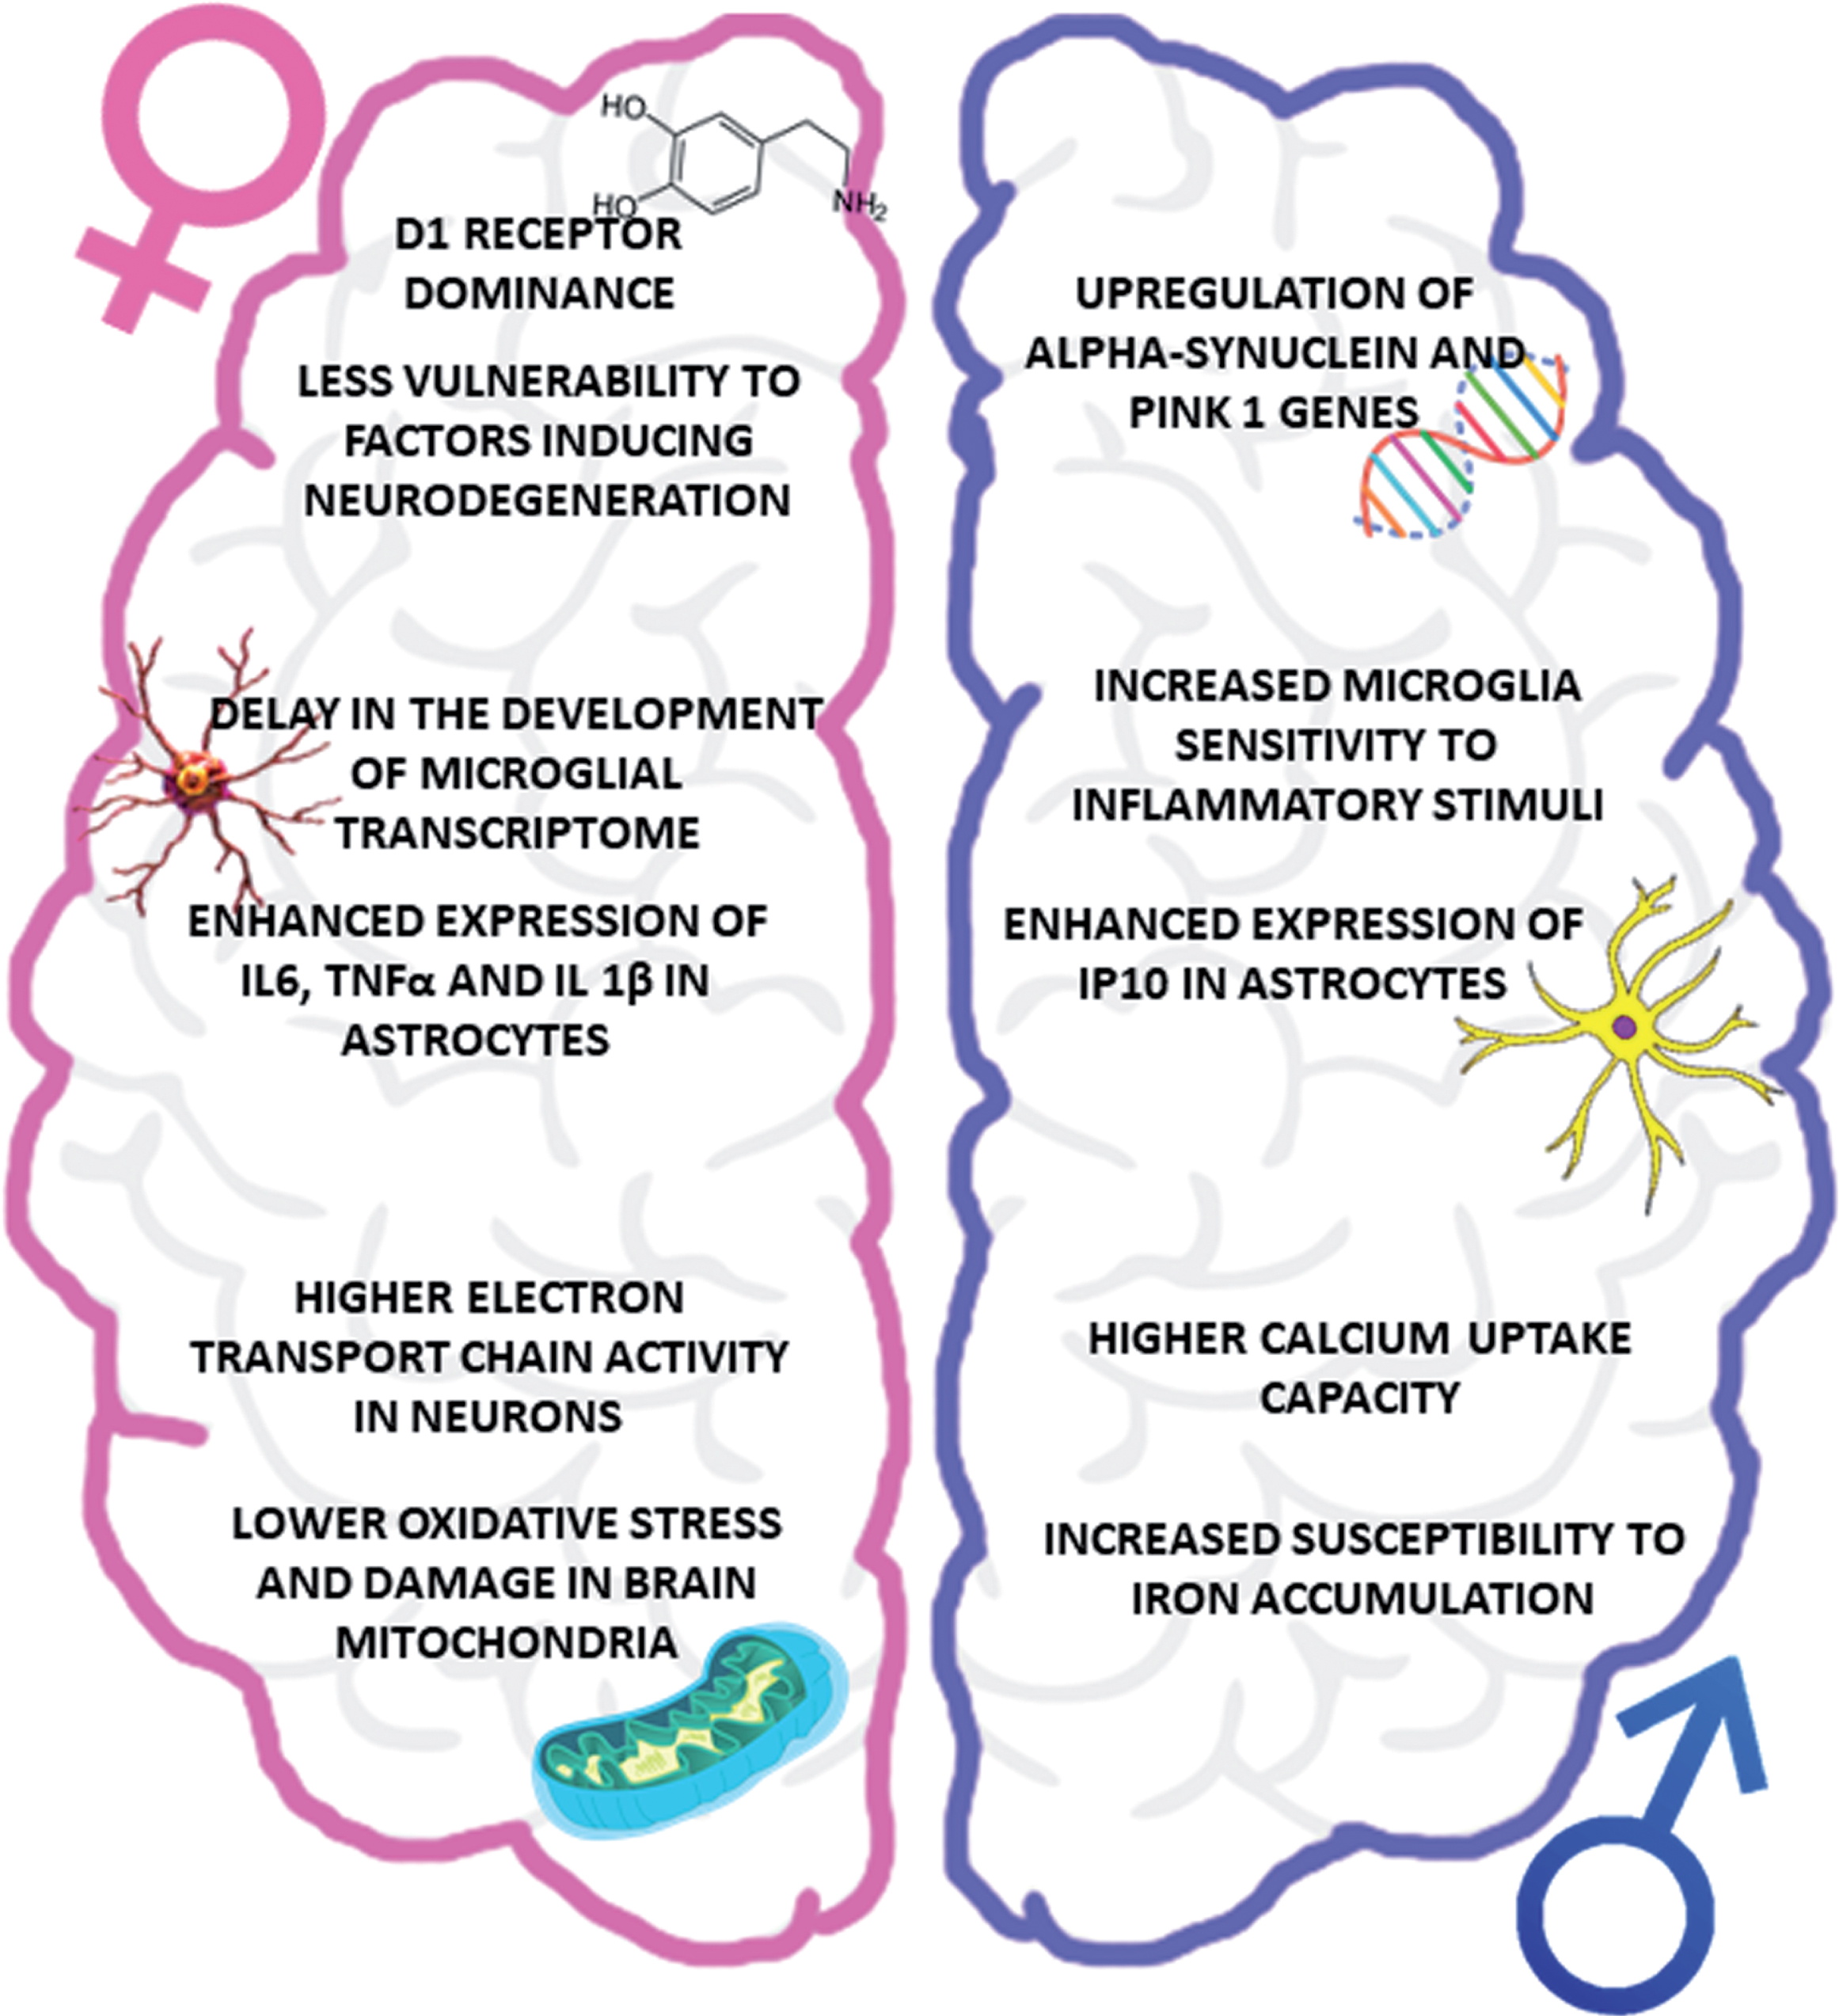 Impact of biological sex on PD pathophysiology. The figure summarizes the main sex-related differences in the key players of PD pathogenesis, focusing attention on the vulnerability of dopaminergic system (upper part), neuroinflammatory cells (central part) and oxidative stress (lower part). IP10, interferon-inducible protein 10.